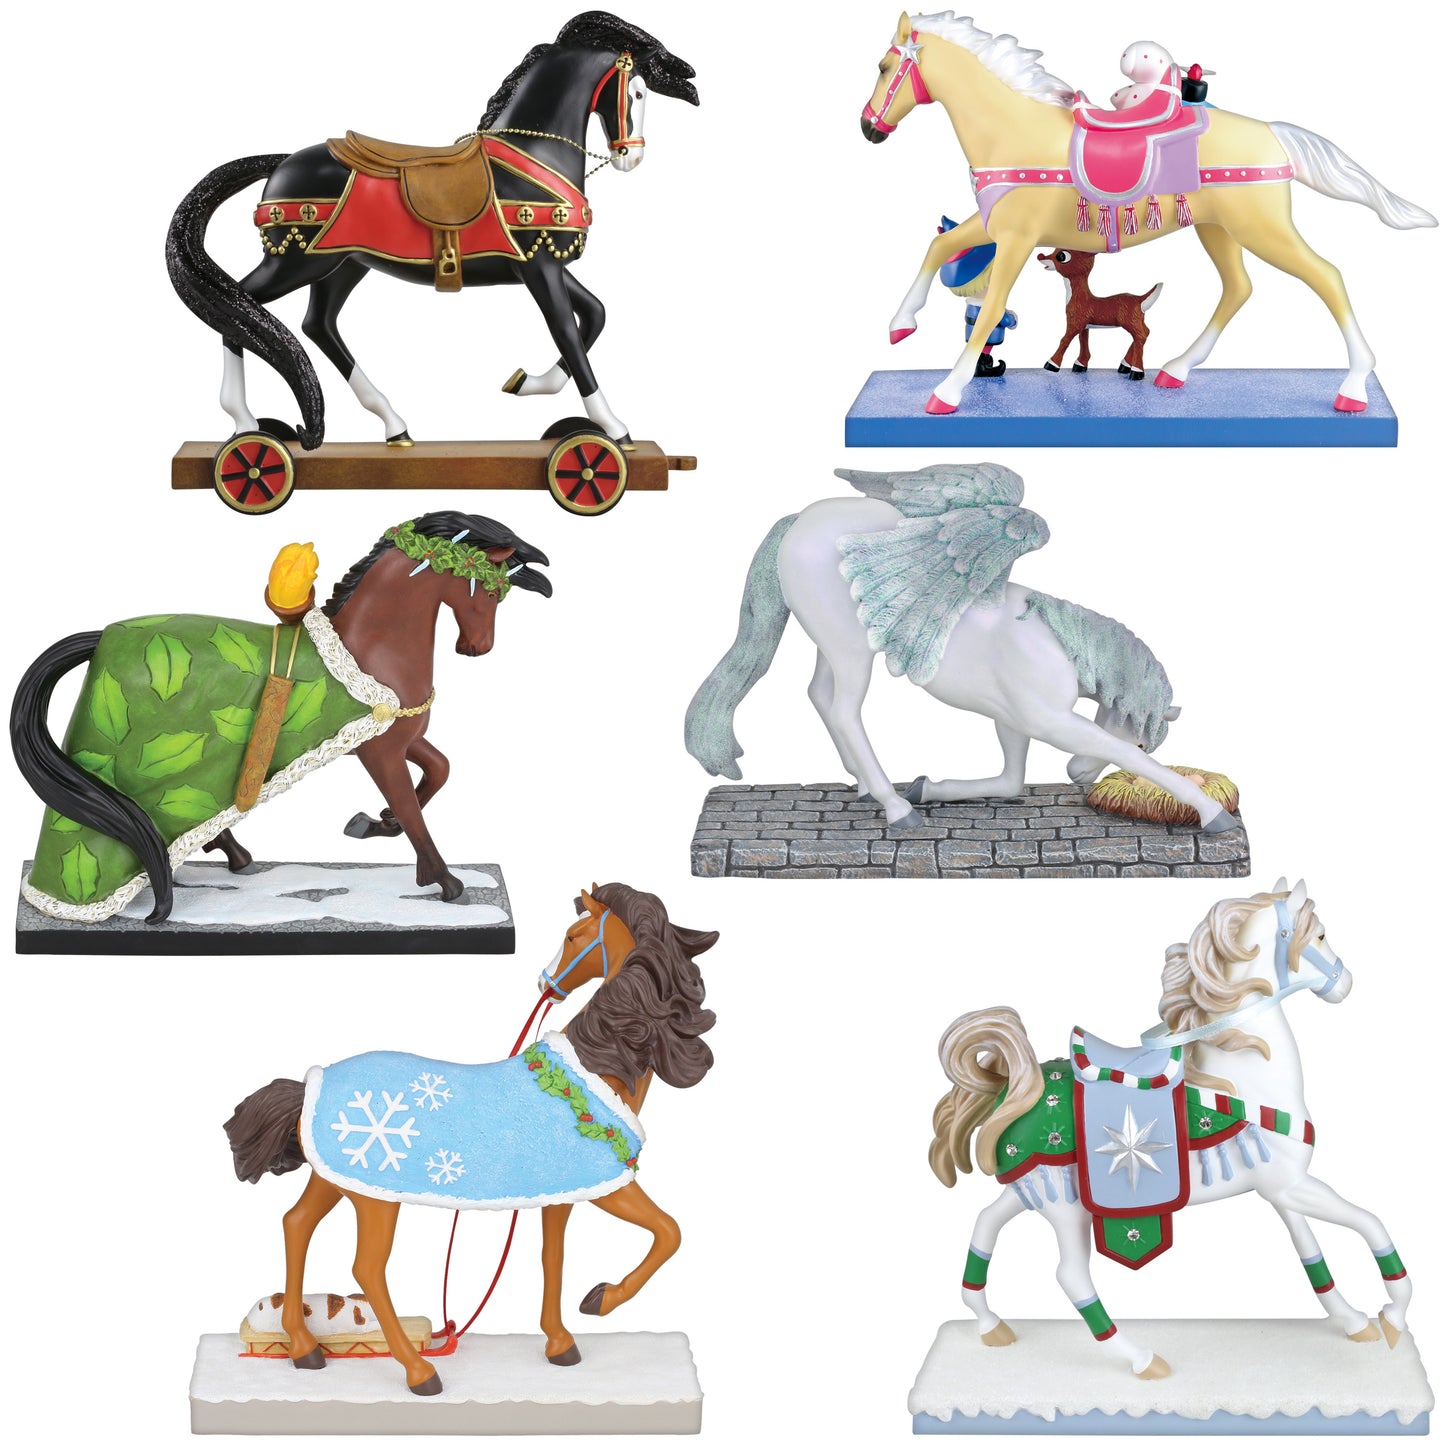 Holiday 2022 Painted Ponies Set